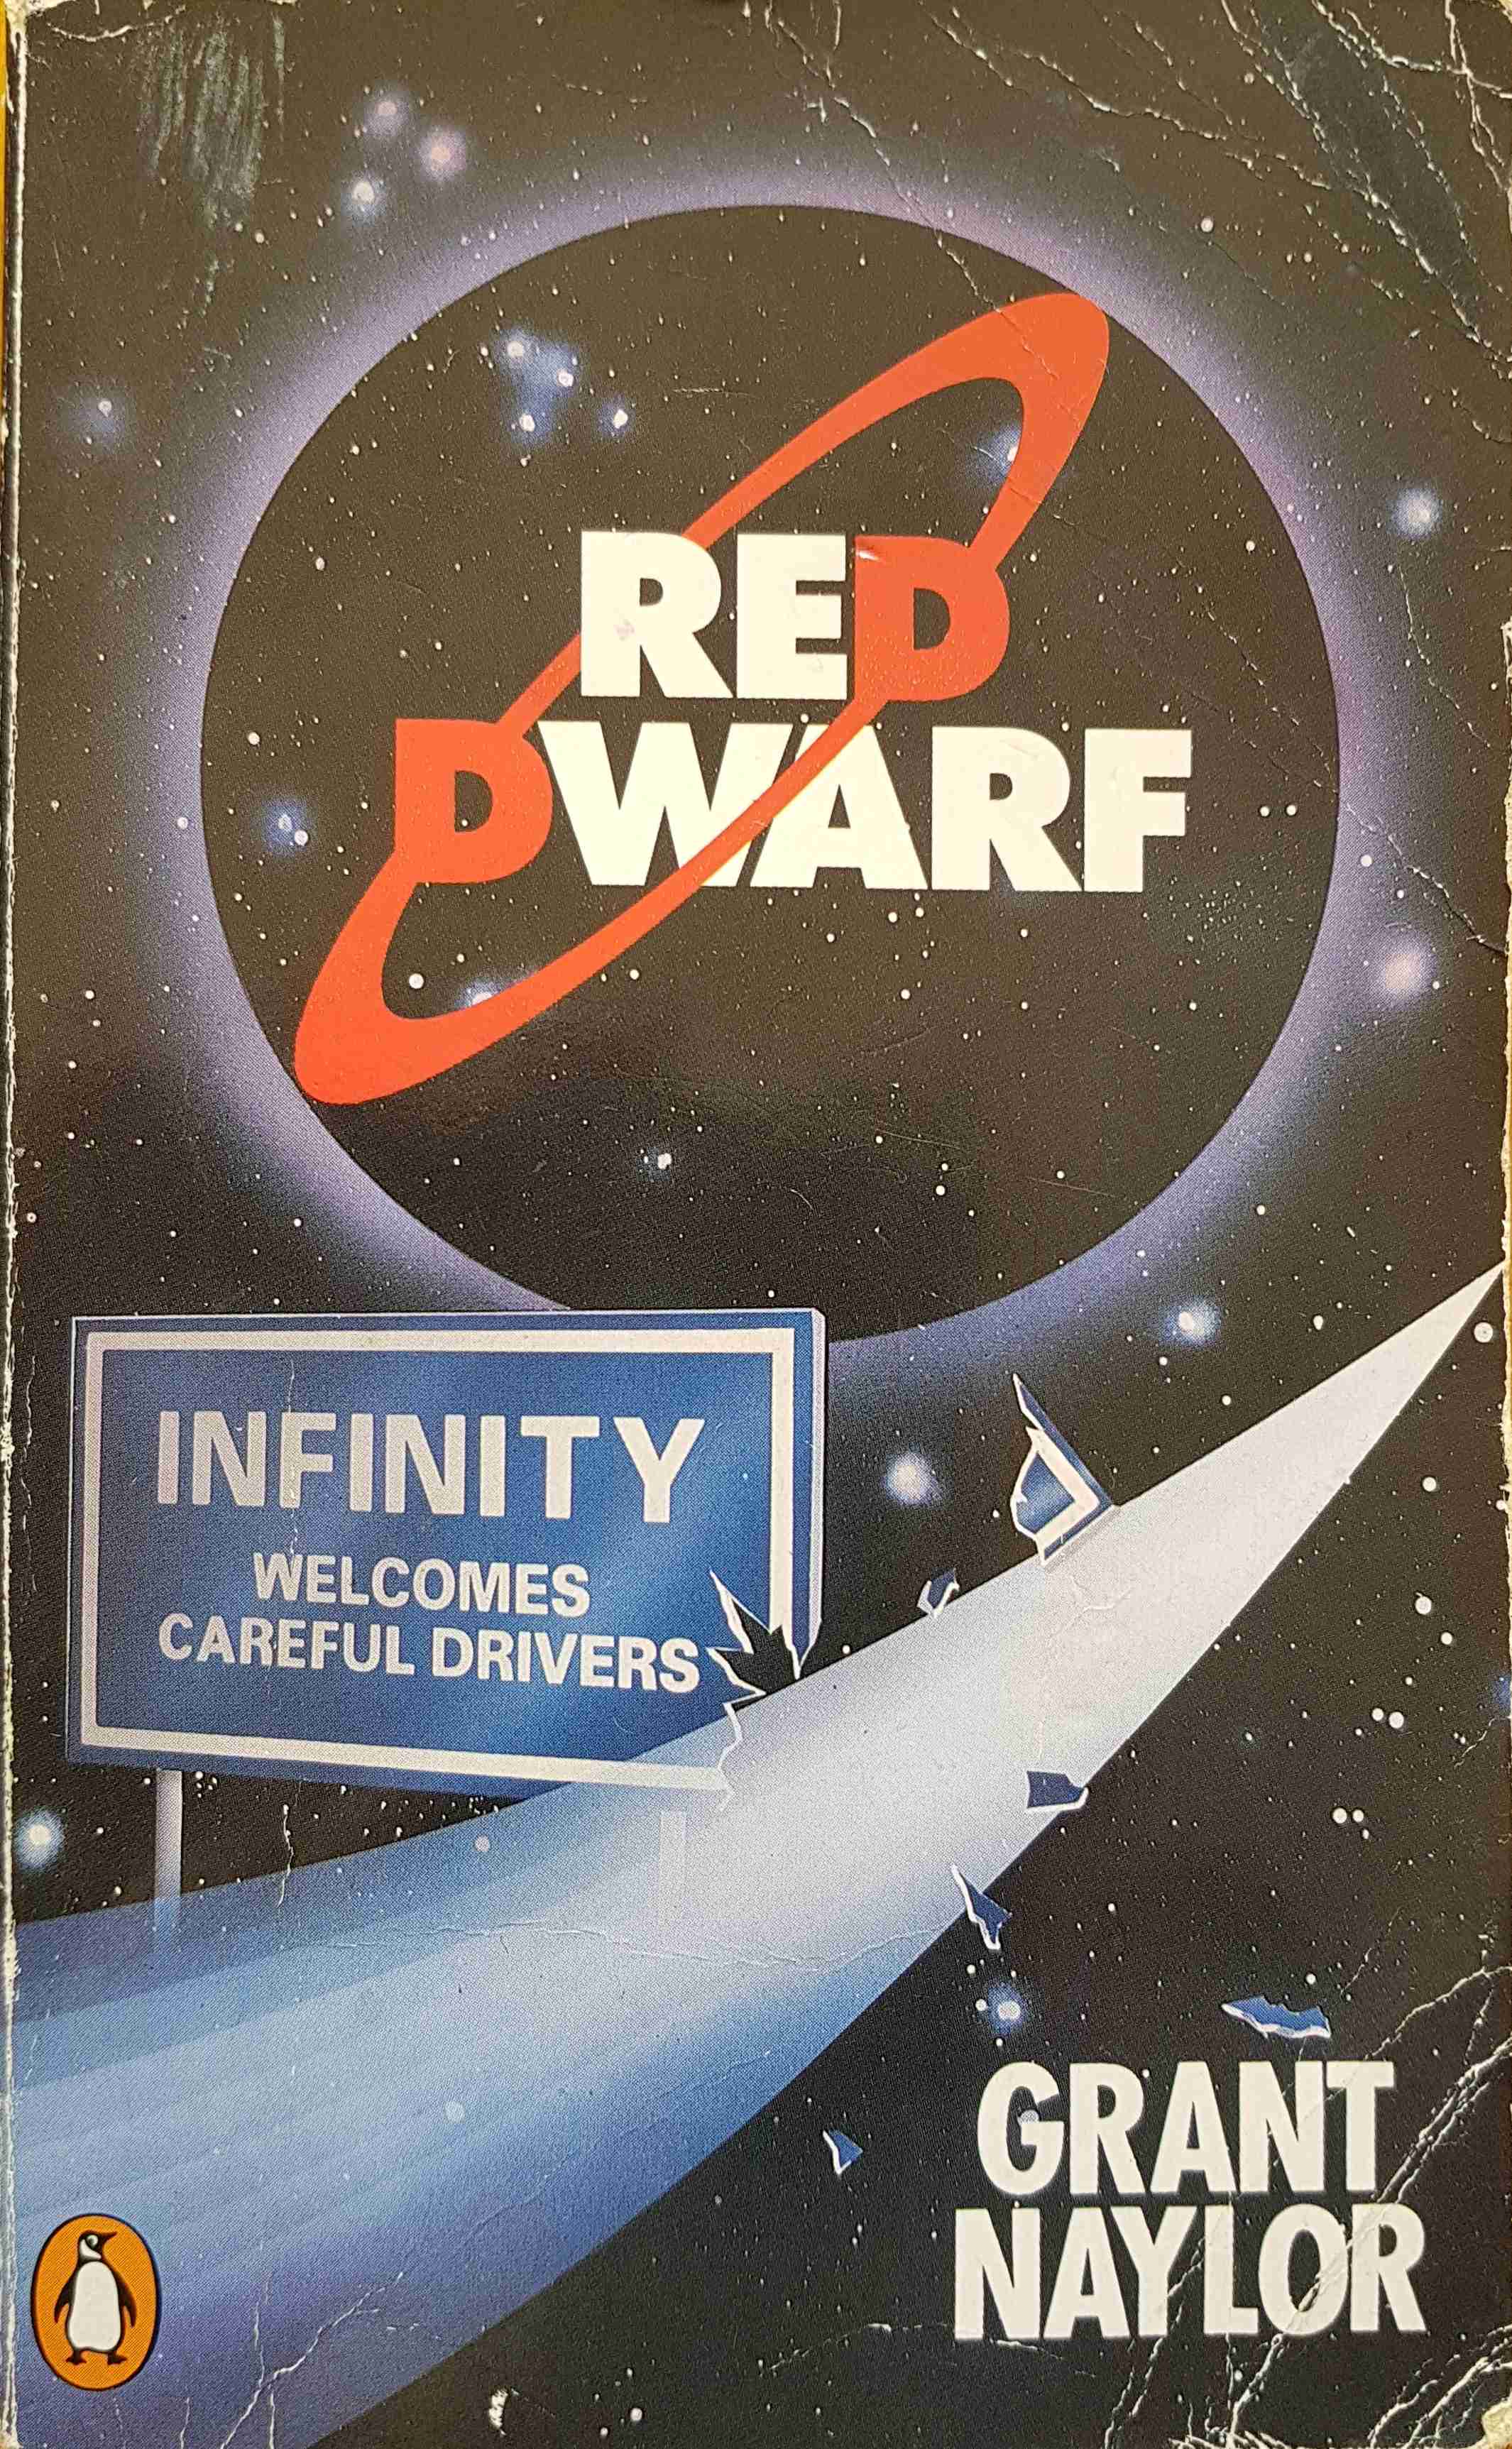 Picture of 0-14-012437-3 Red dwarf - The full story by artist Grant Naylor from the BBC books - Records and Tapes library